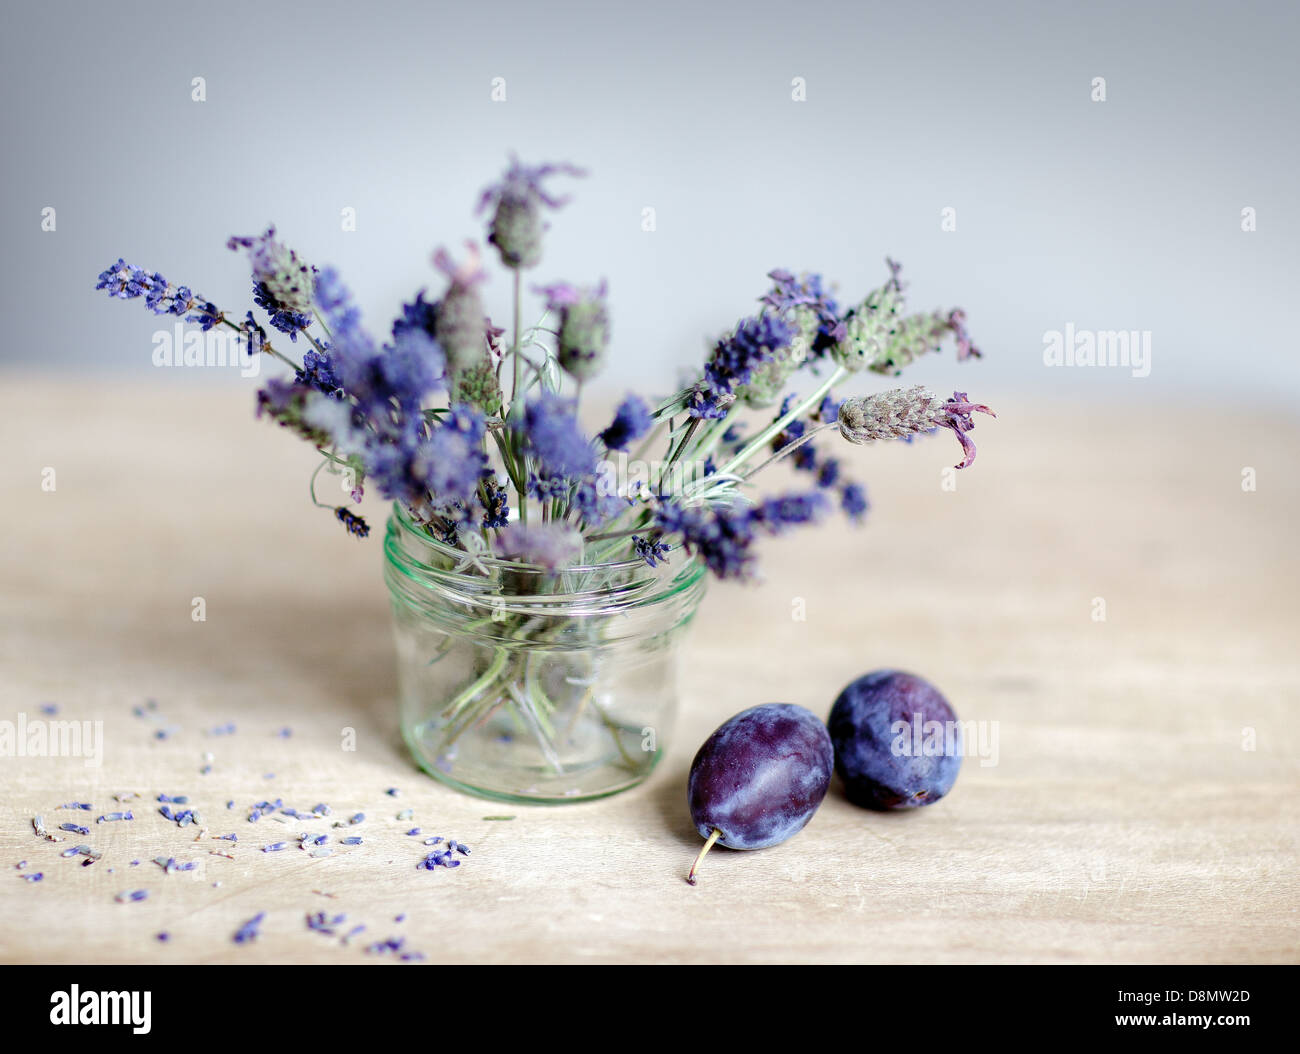 Lavender and Plums Stock Photo